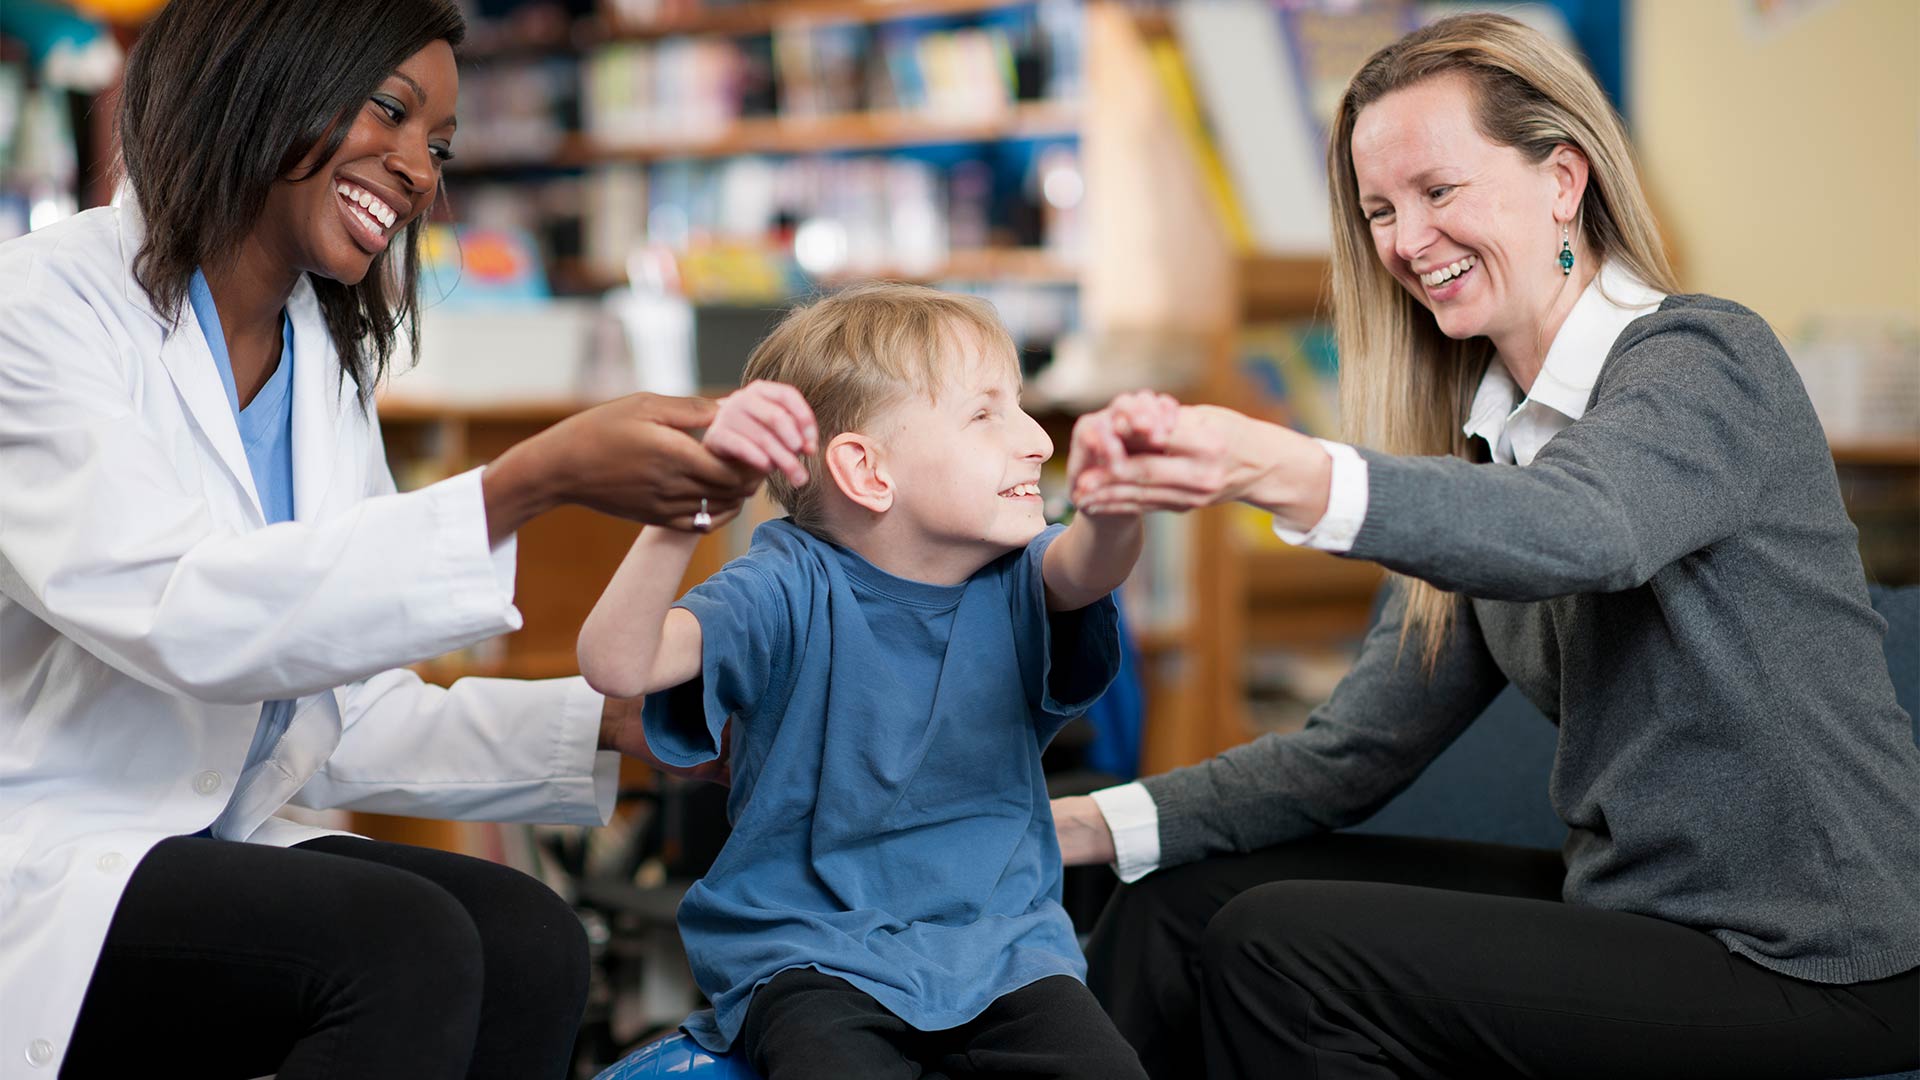 Service children. Children with Disabilities. Education with physical Education of children with Special needs. Occupational Therapy Education. Occupational Therapy Education needed.